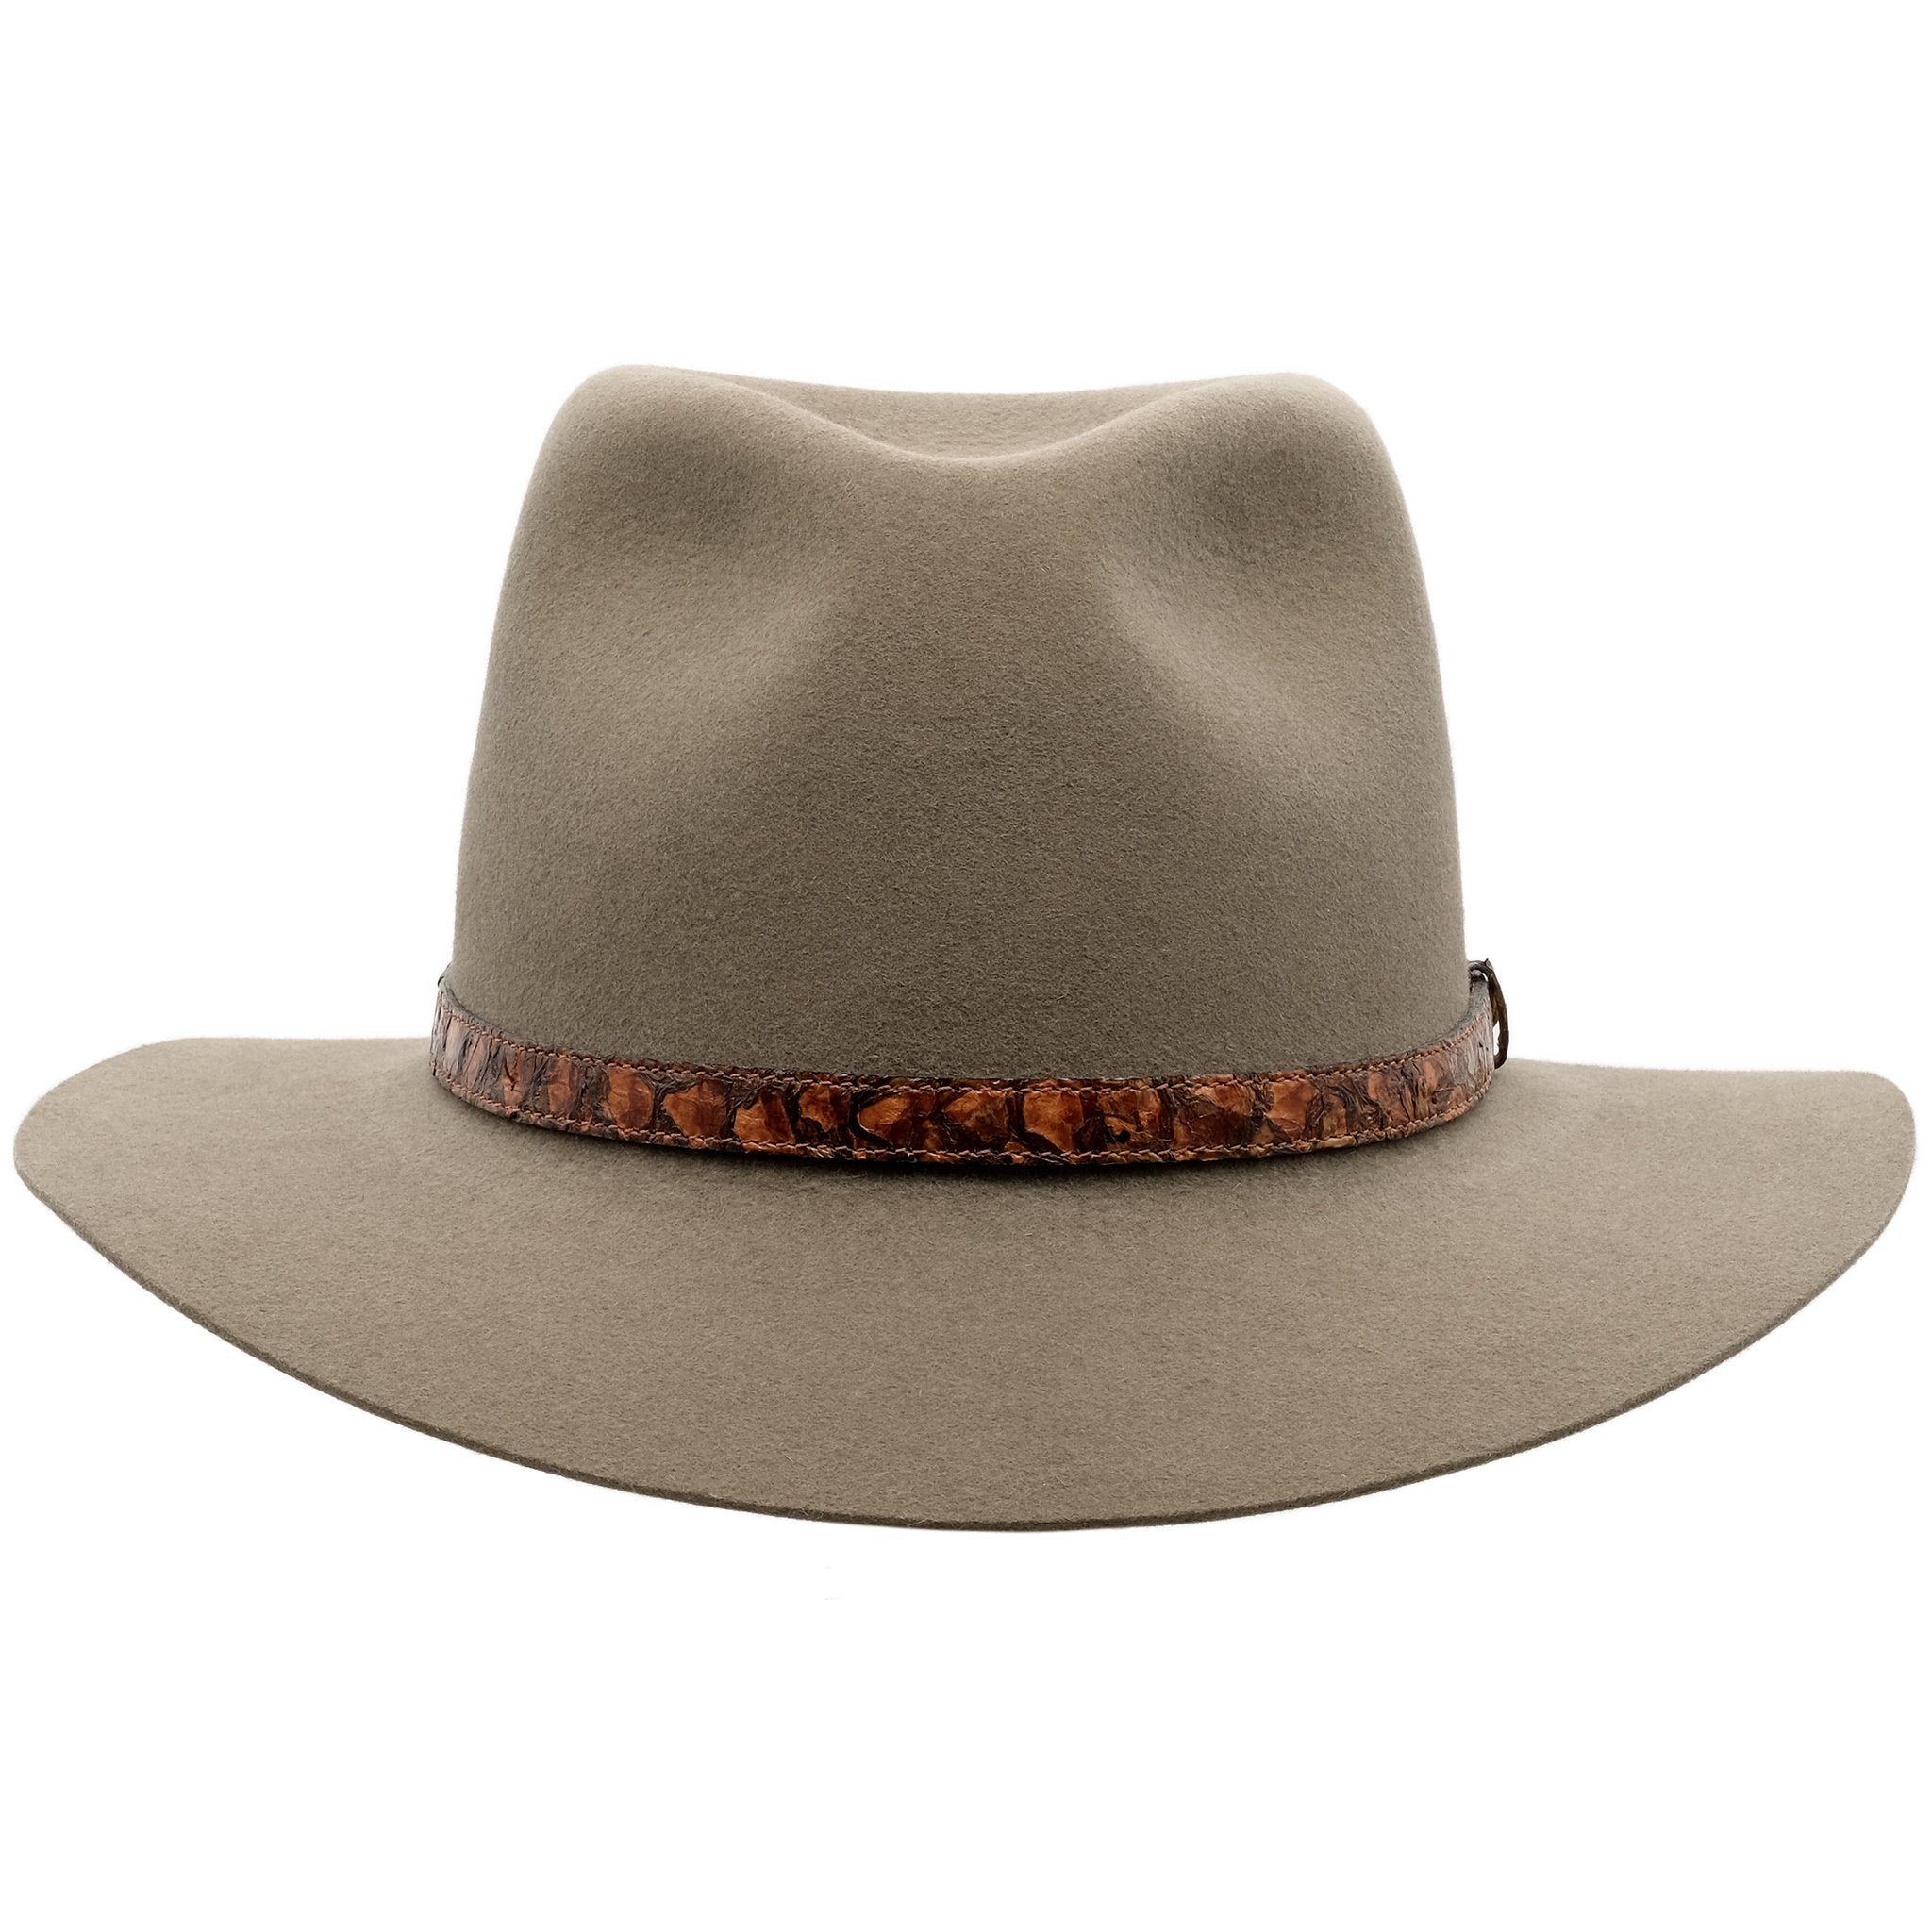 Front view of Akubra Banjo Paterson hat in Heritage Fawn colour